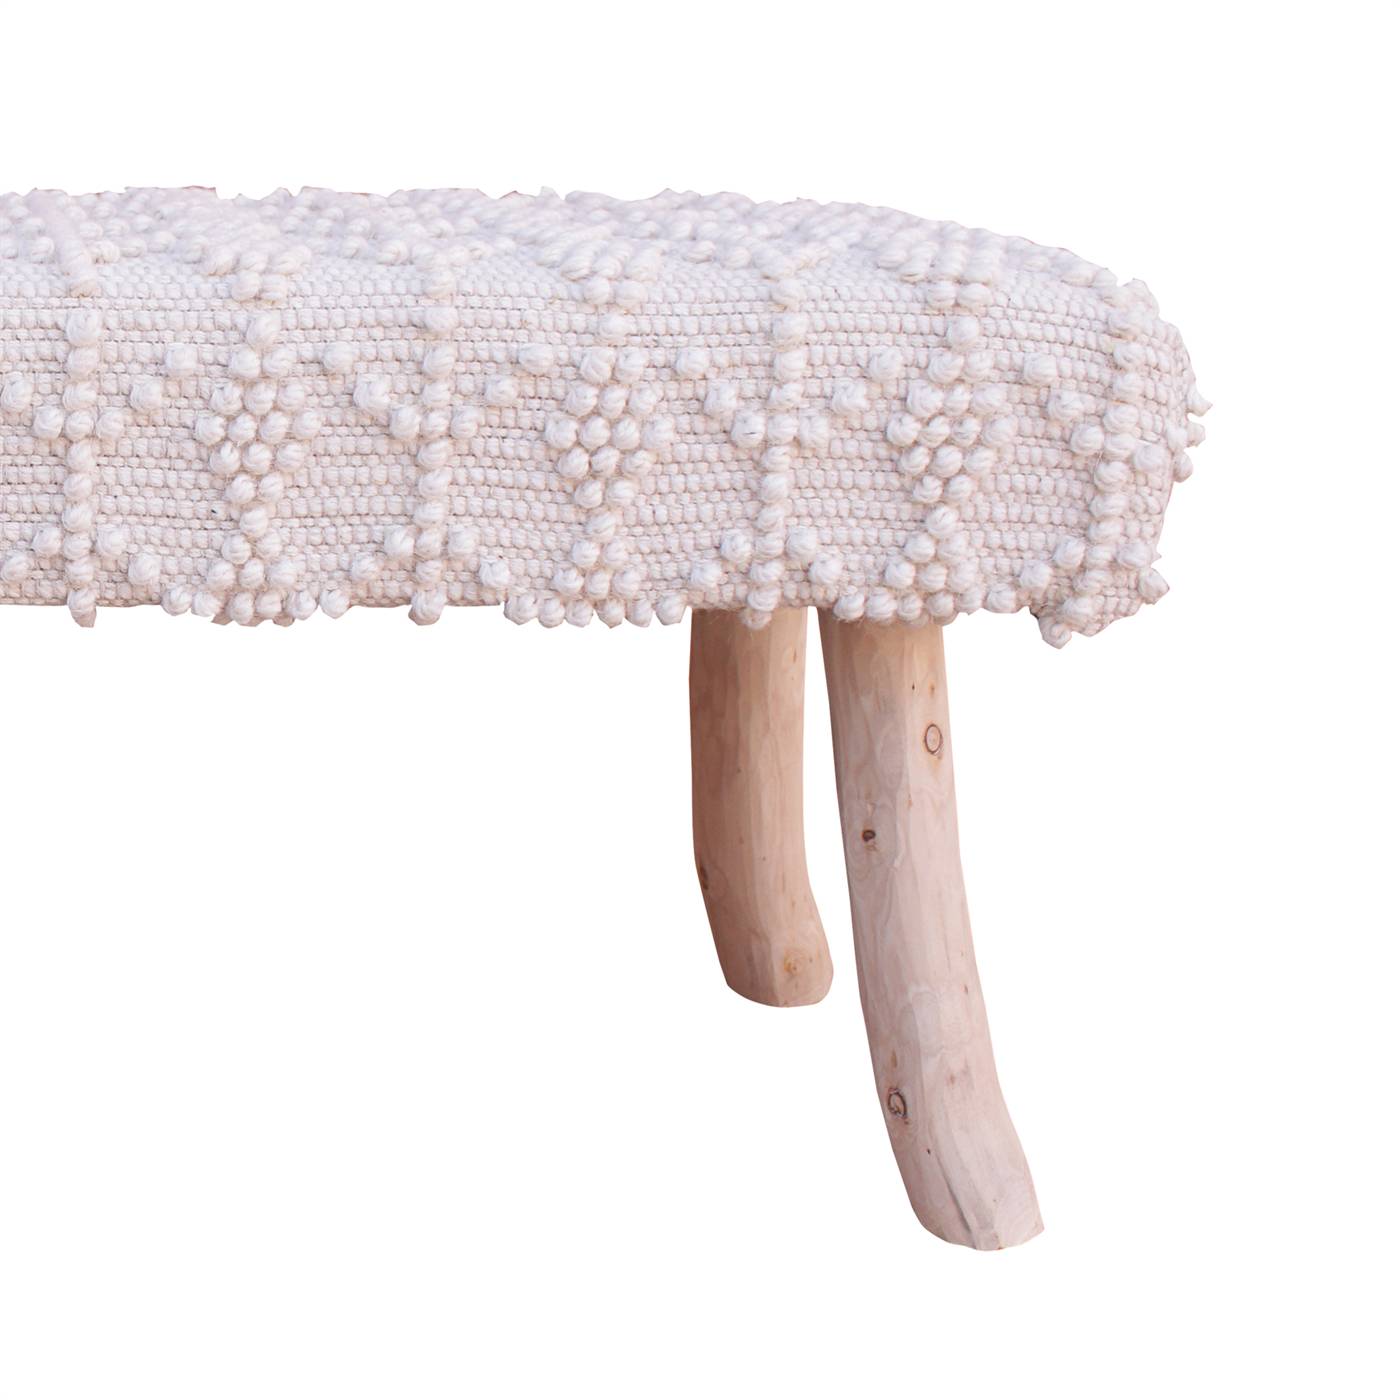 Kandos Bench, 120x40x50 cm, Natural White, Wool, Hand Woven, Pitloom, All Loop